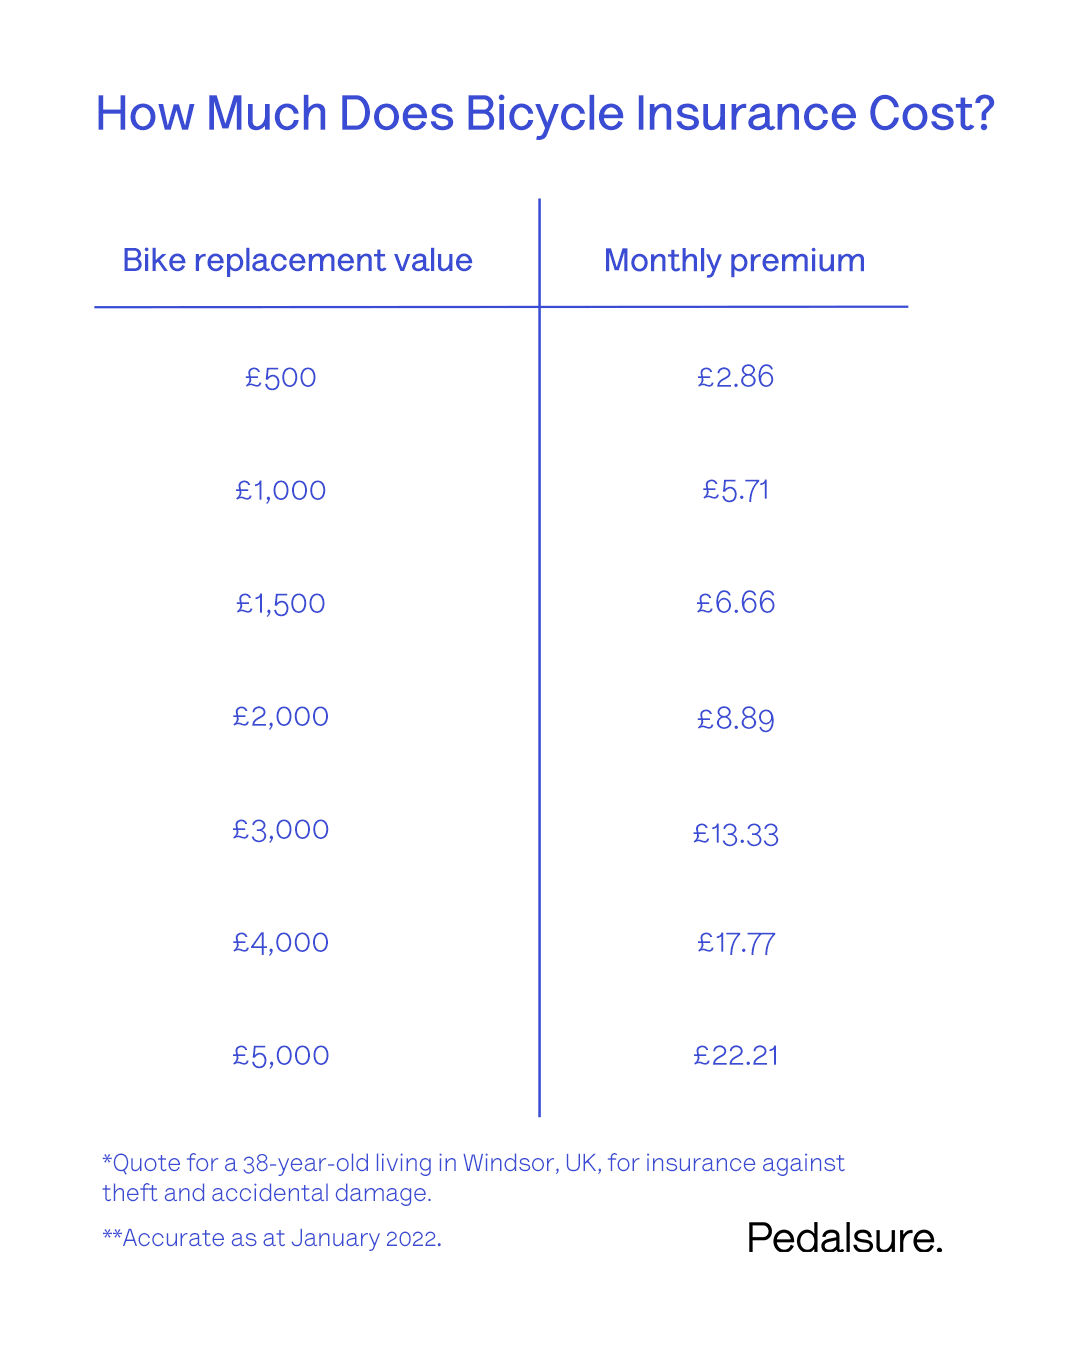 How much does bicycle insurance cost